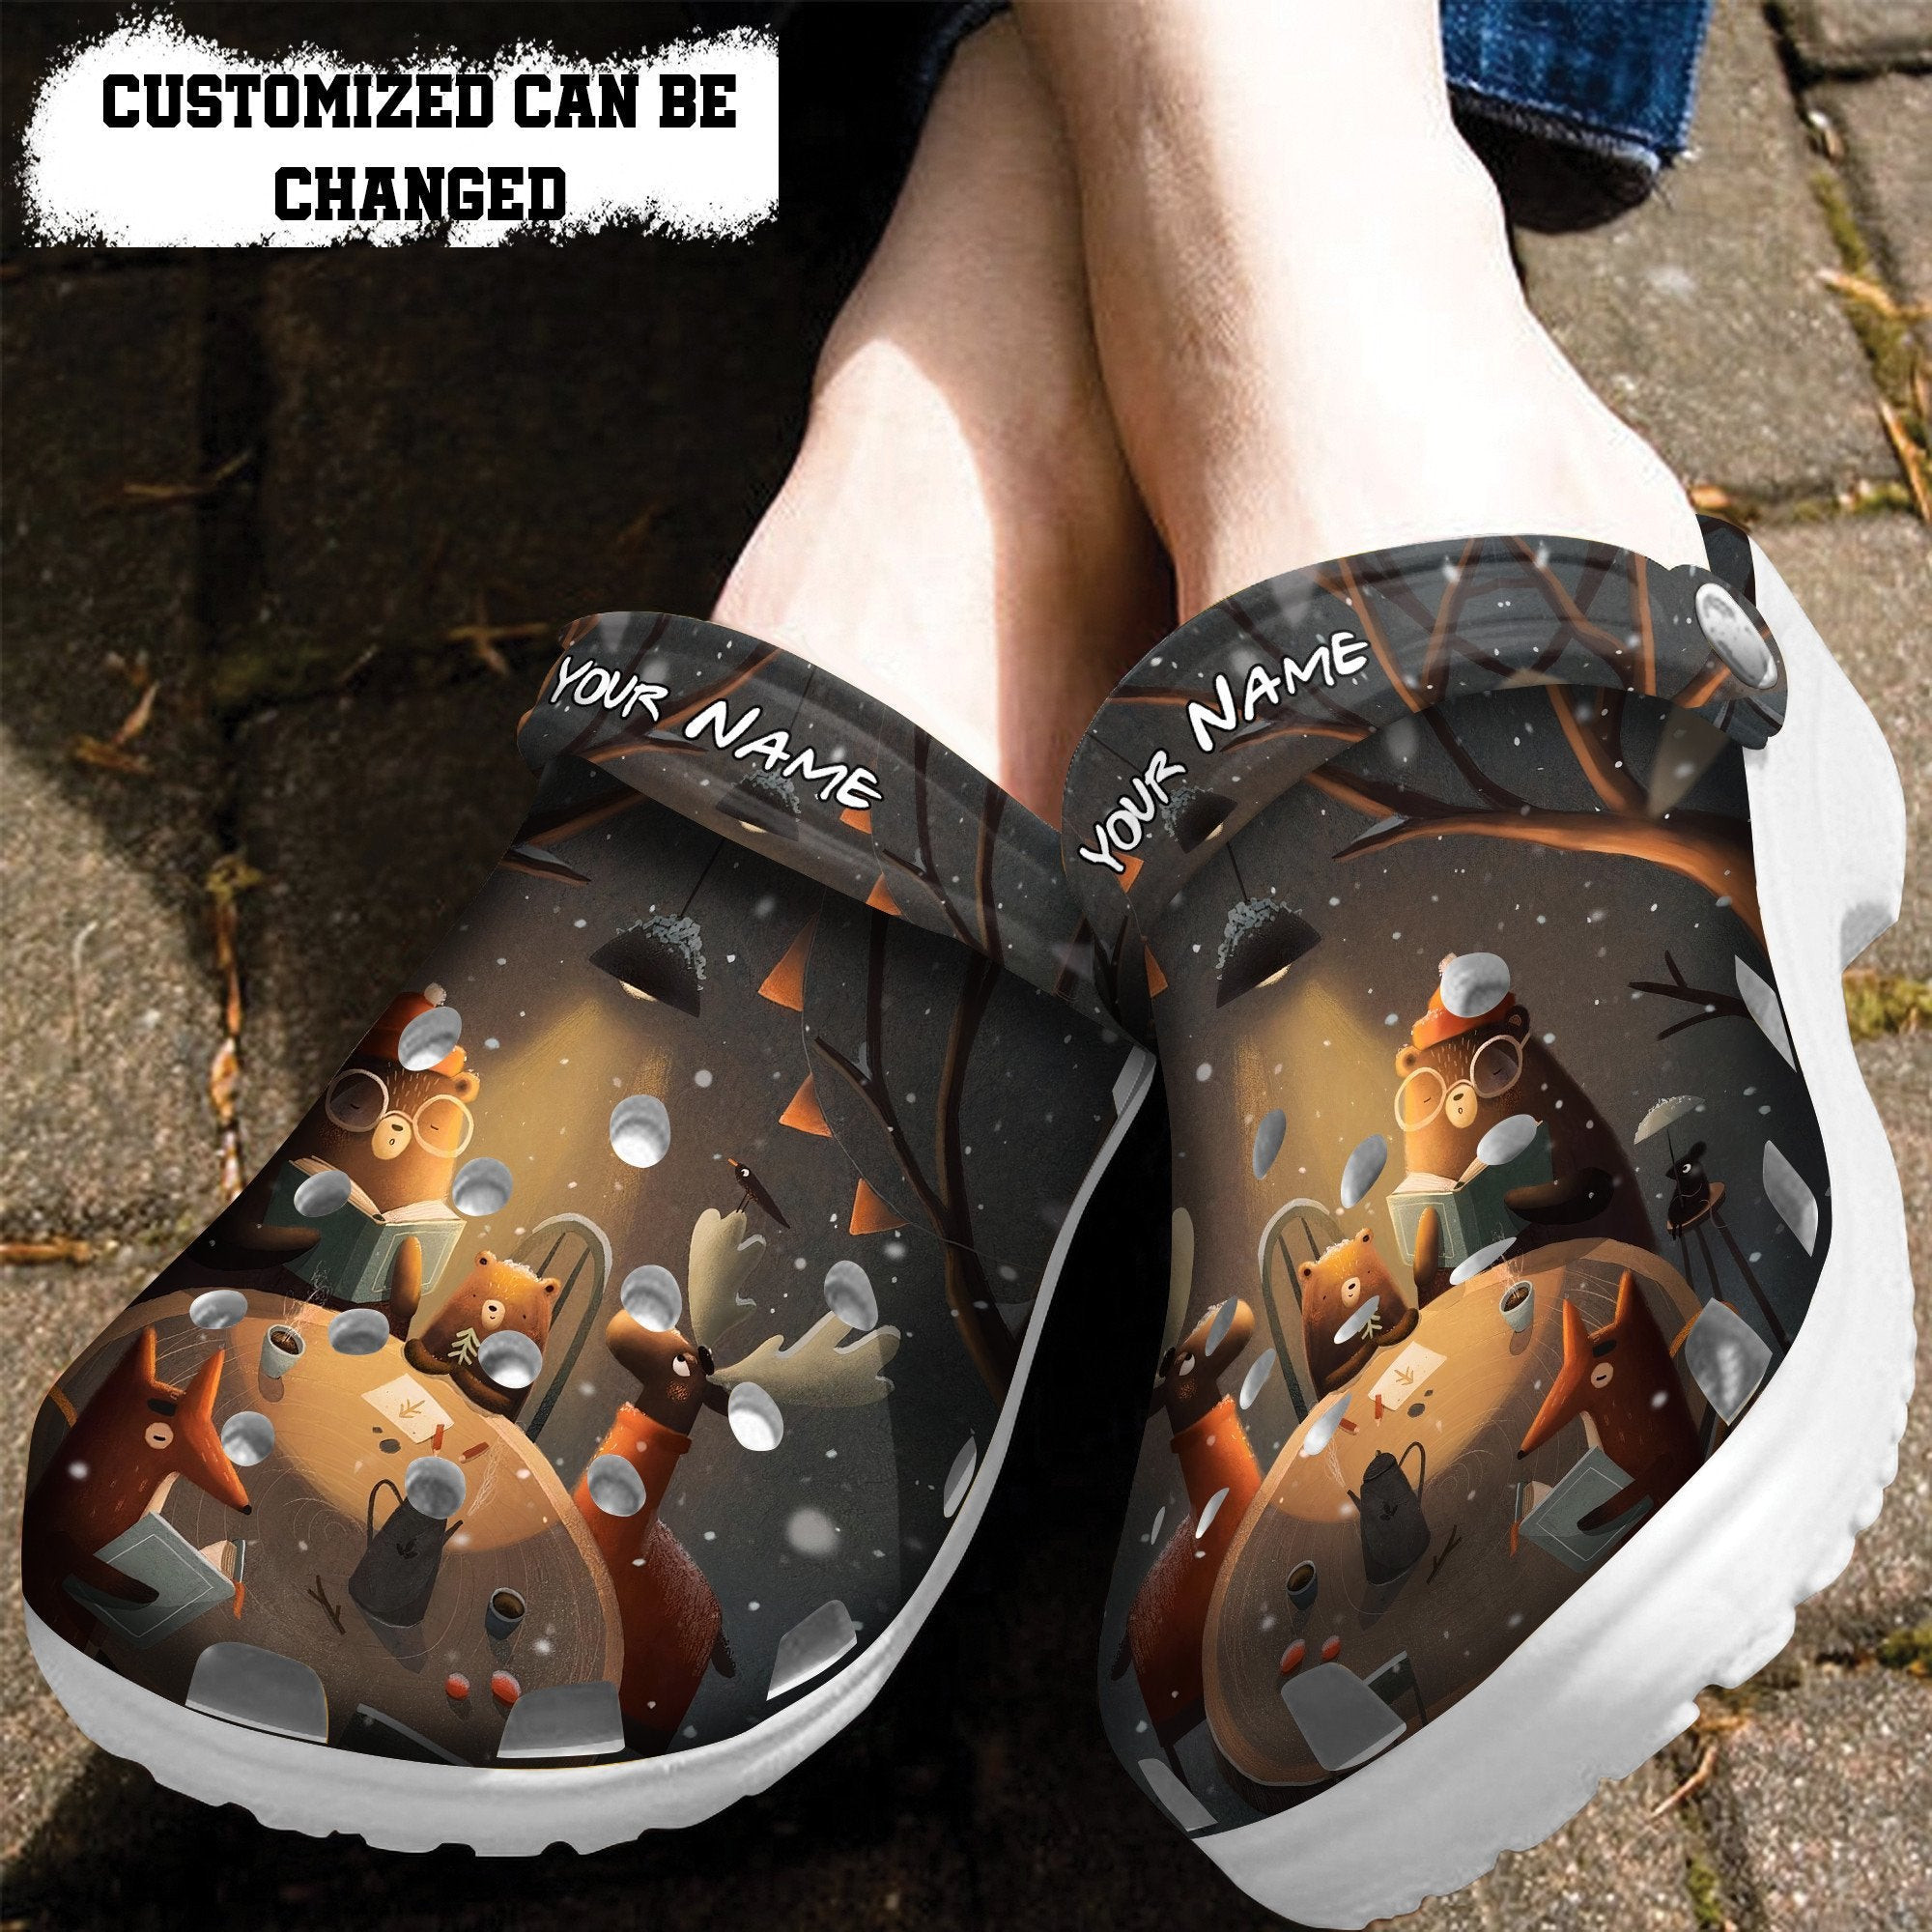 Book Girl Bear Chibi Cute Crocs Shoes Gifts Birthday Mother Day – Book Worm Shoes Croc Clogs Customize Name